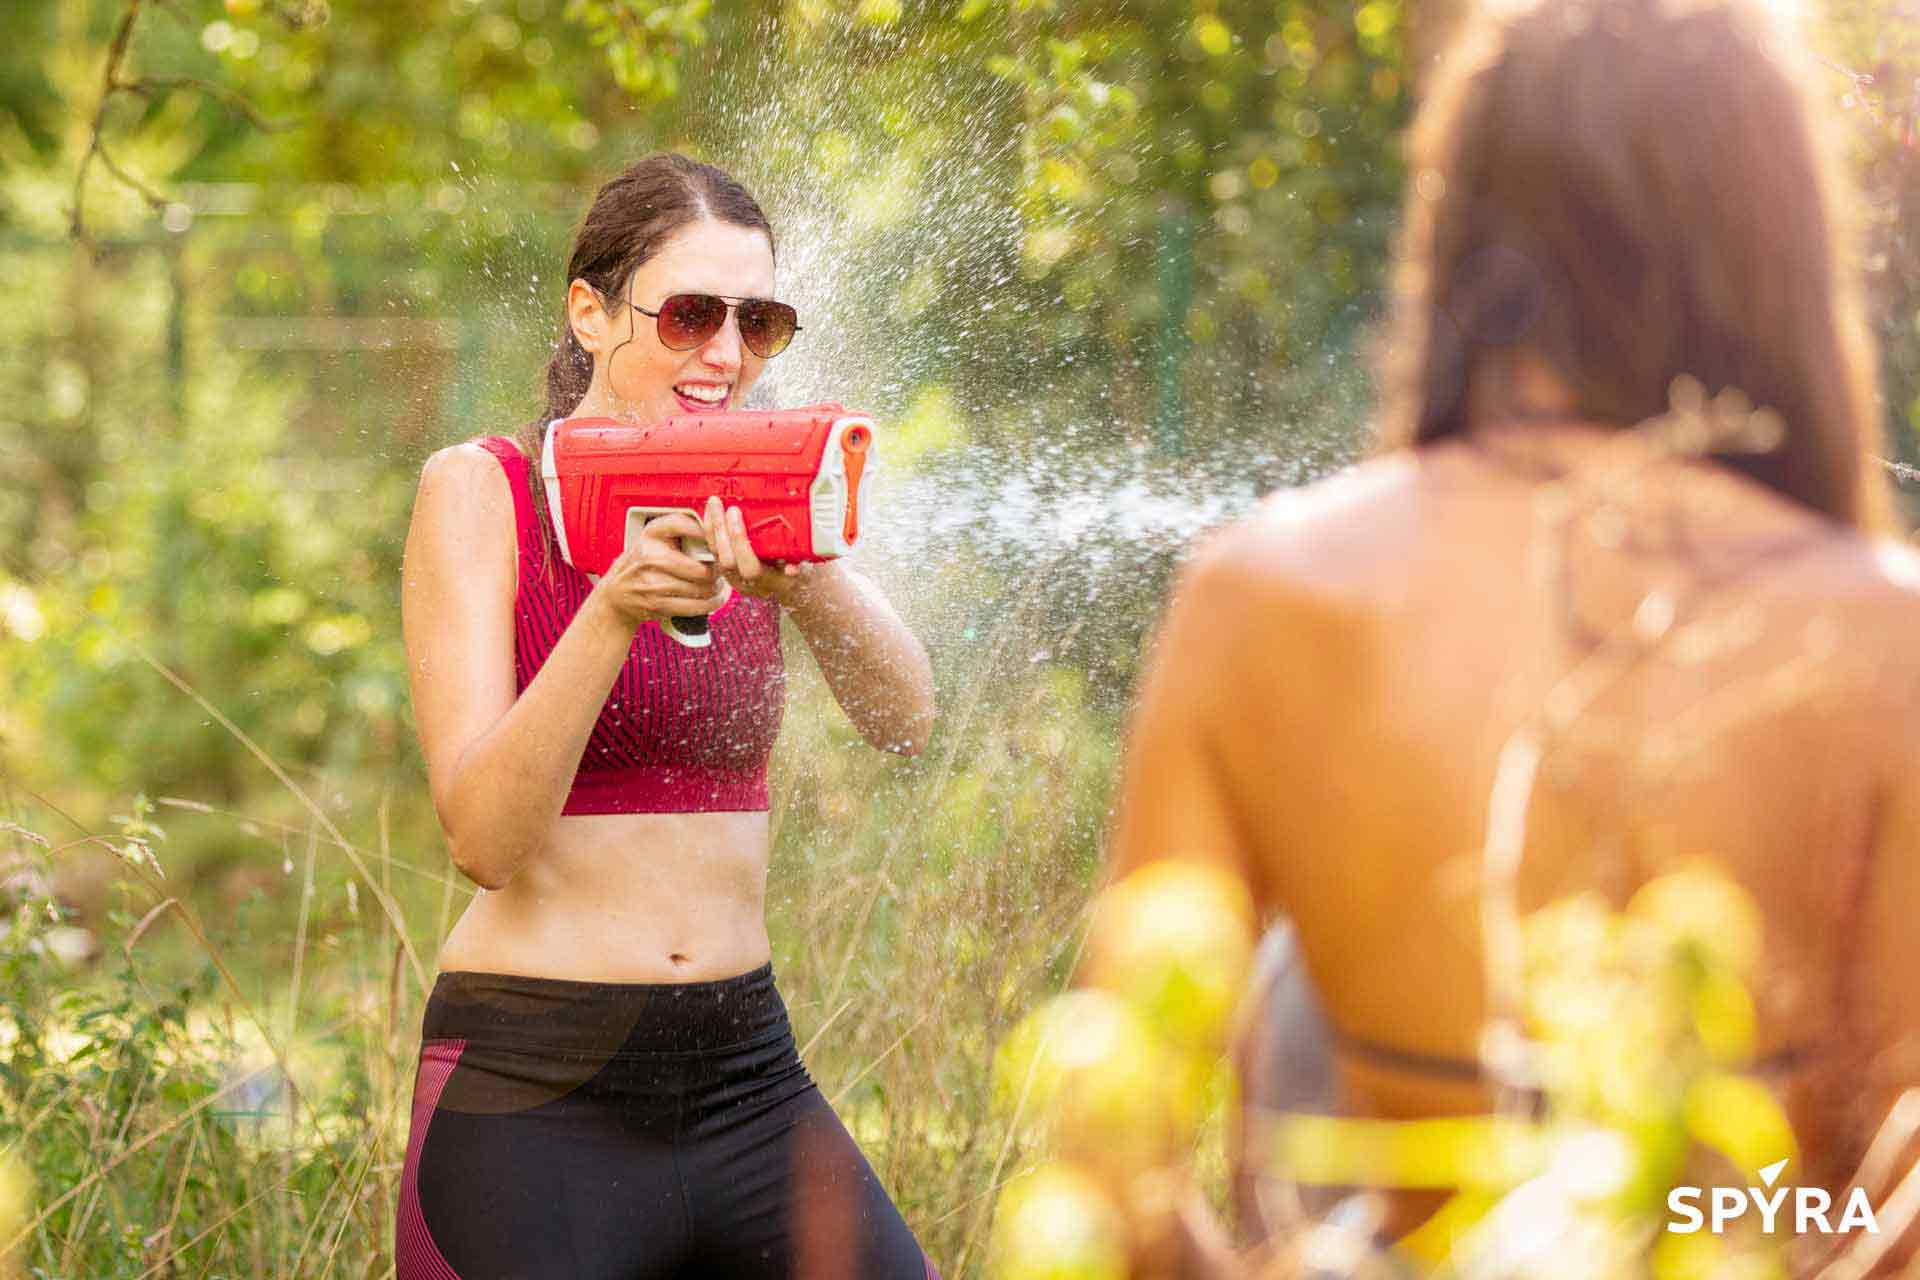 SpyraTwo is a Digital Water Gun that Will Blow You Away